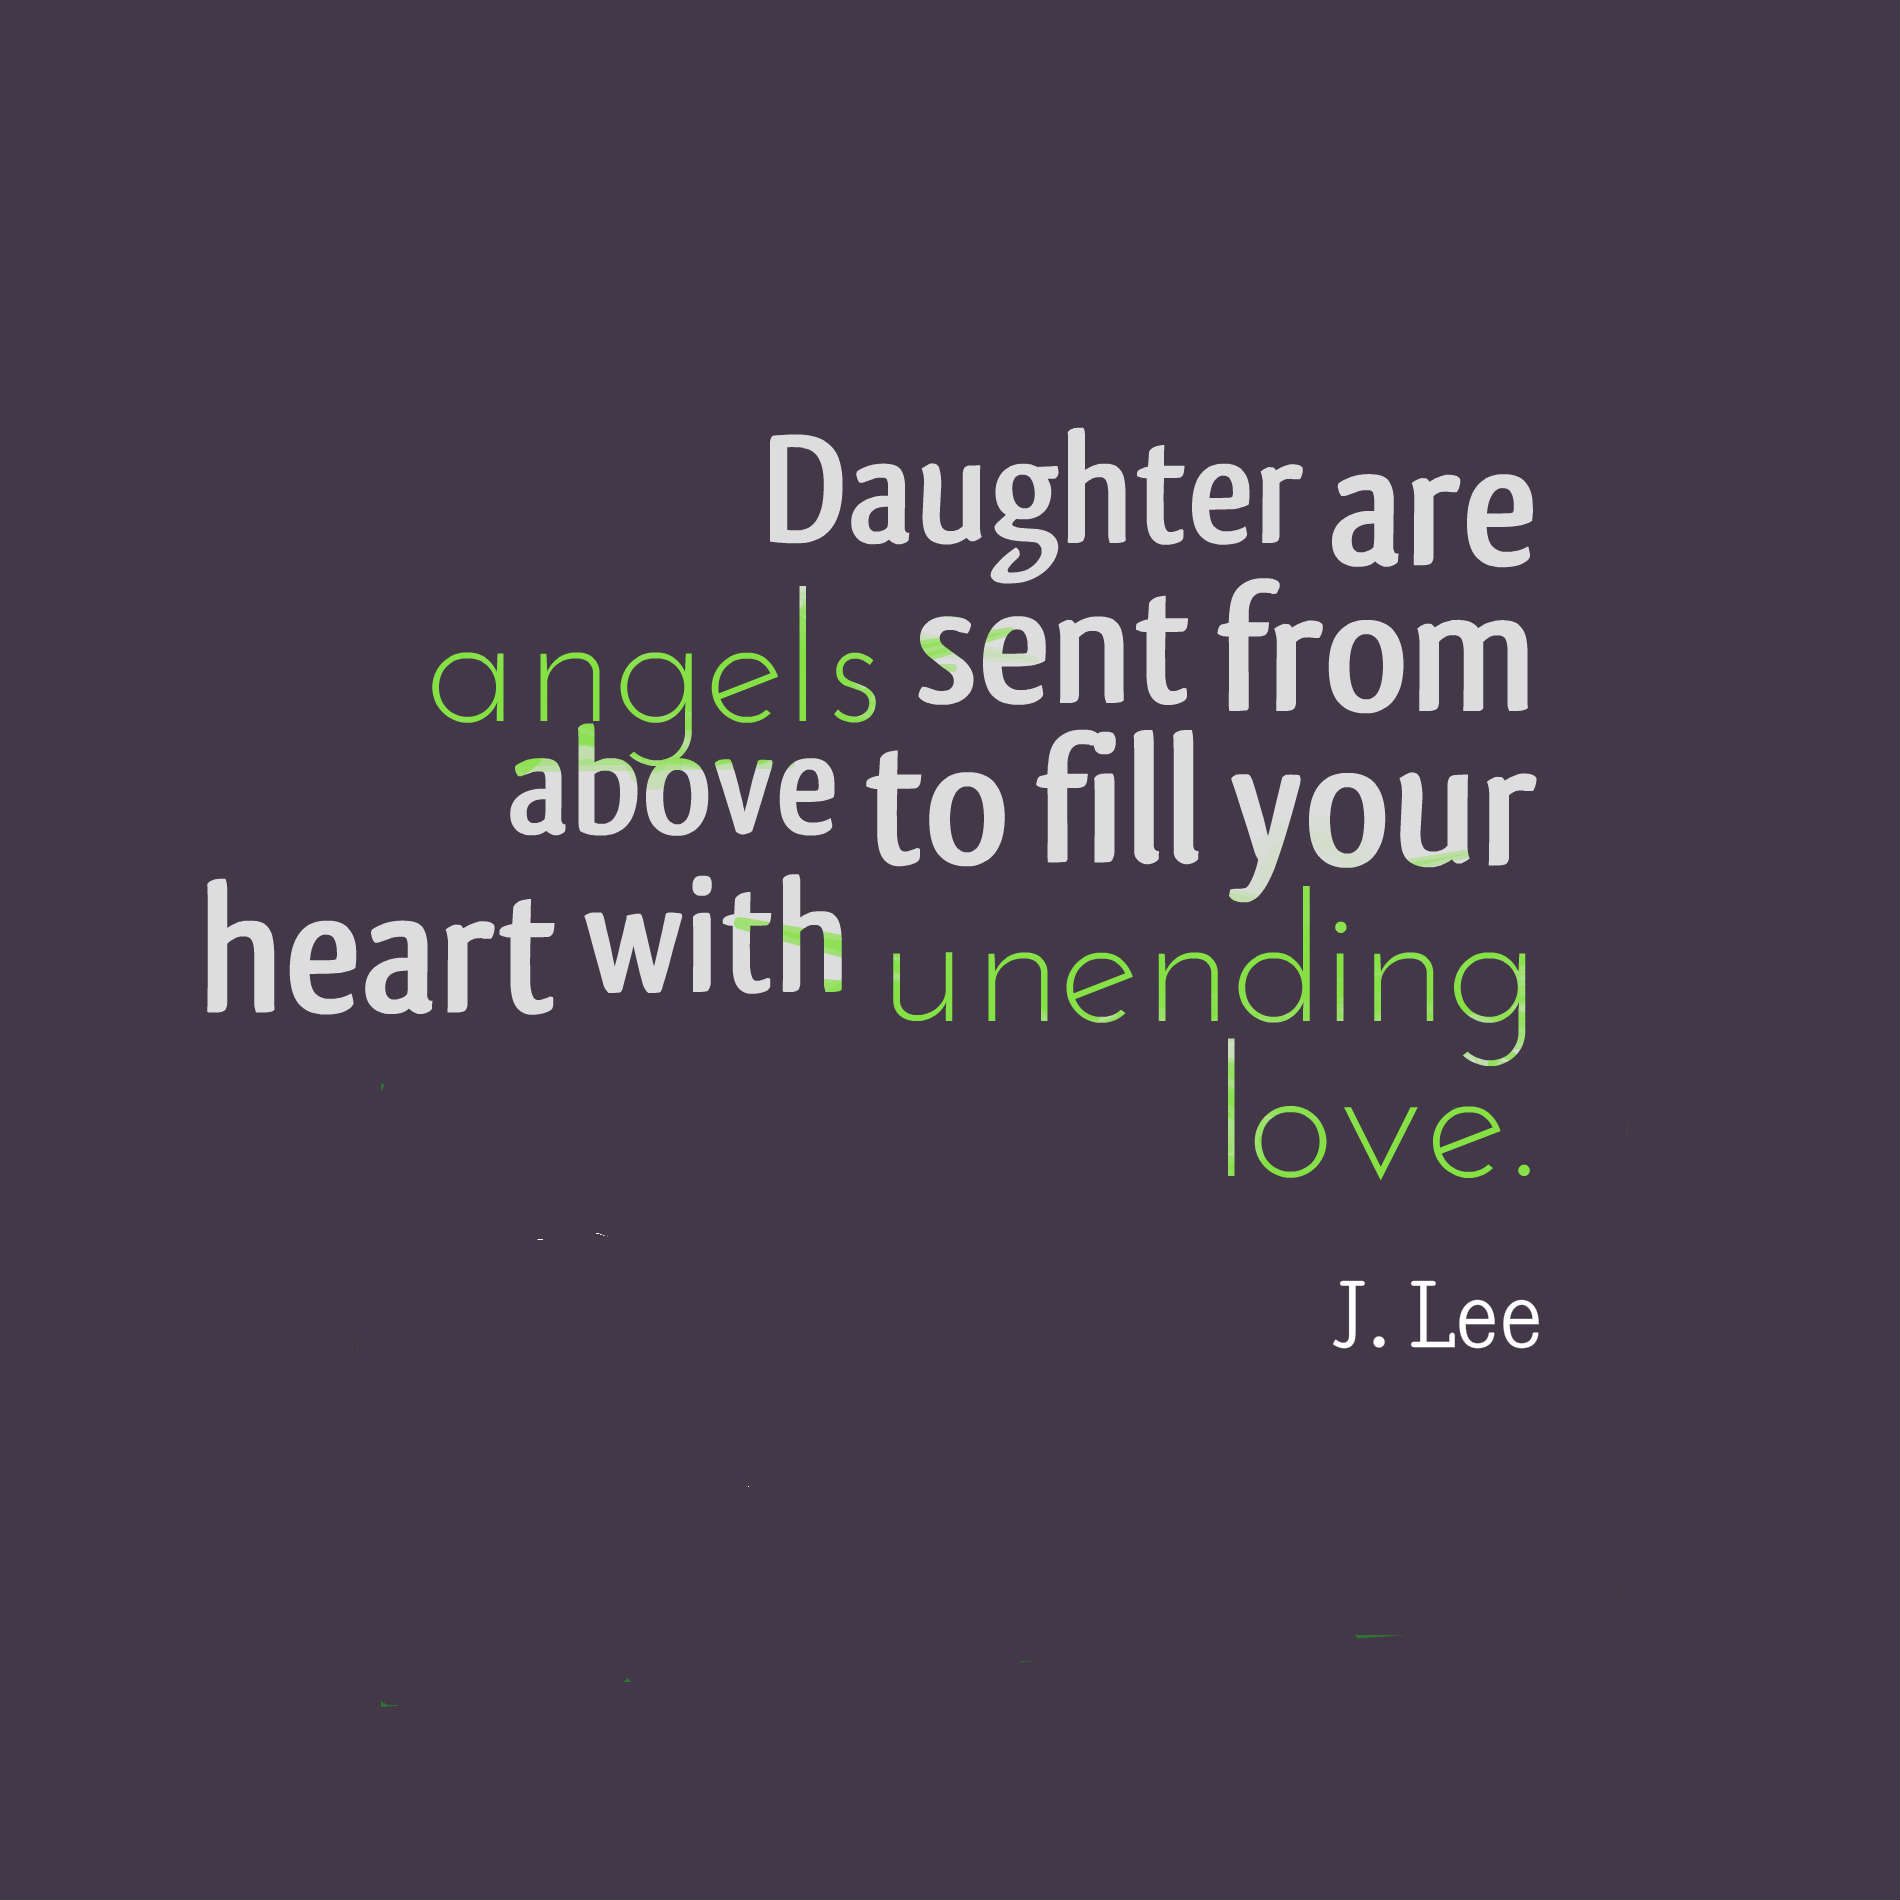 Daughter are angels sent from above to fill your heart with unending love.